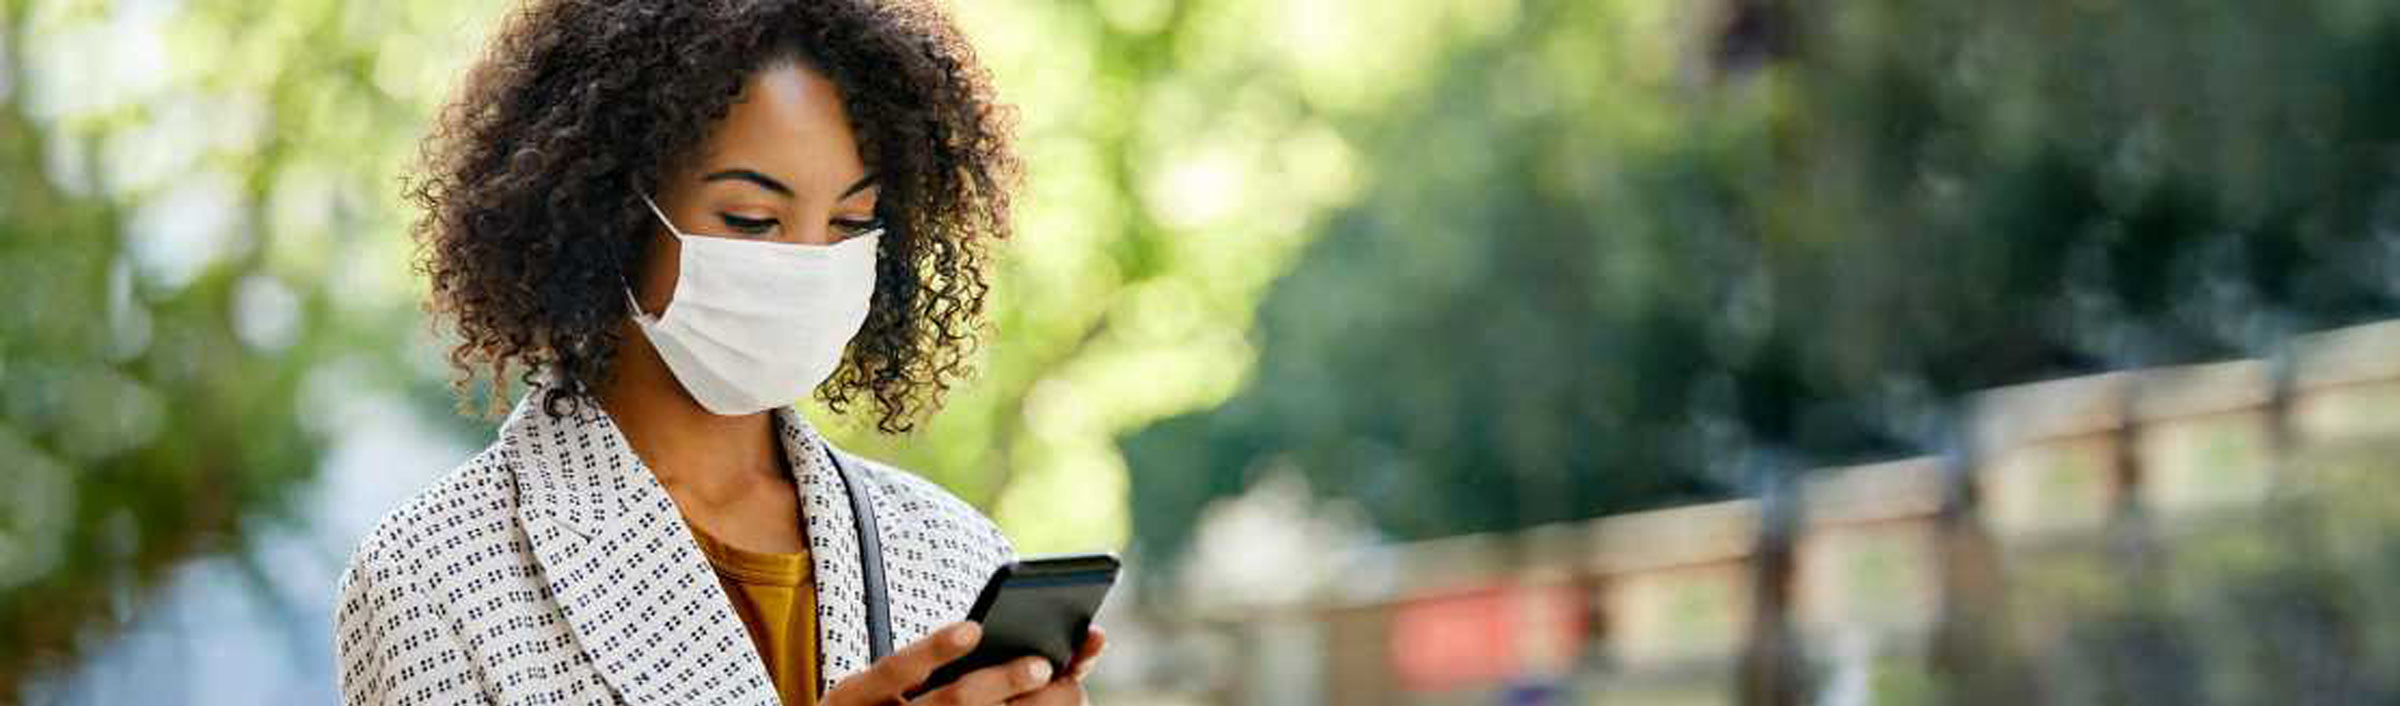 Woman with face mask and smartphone